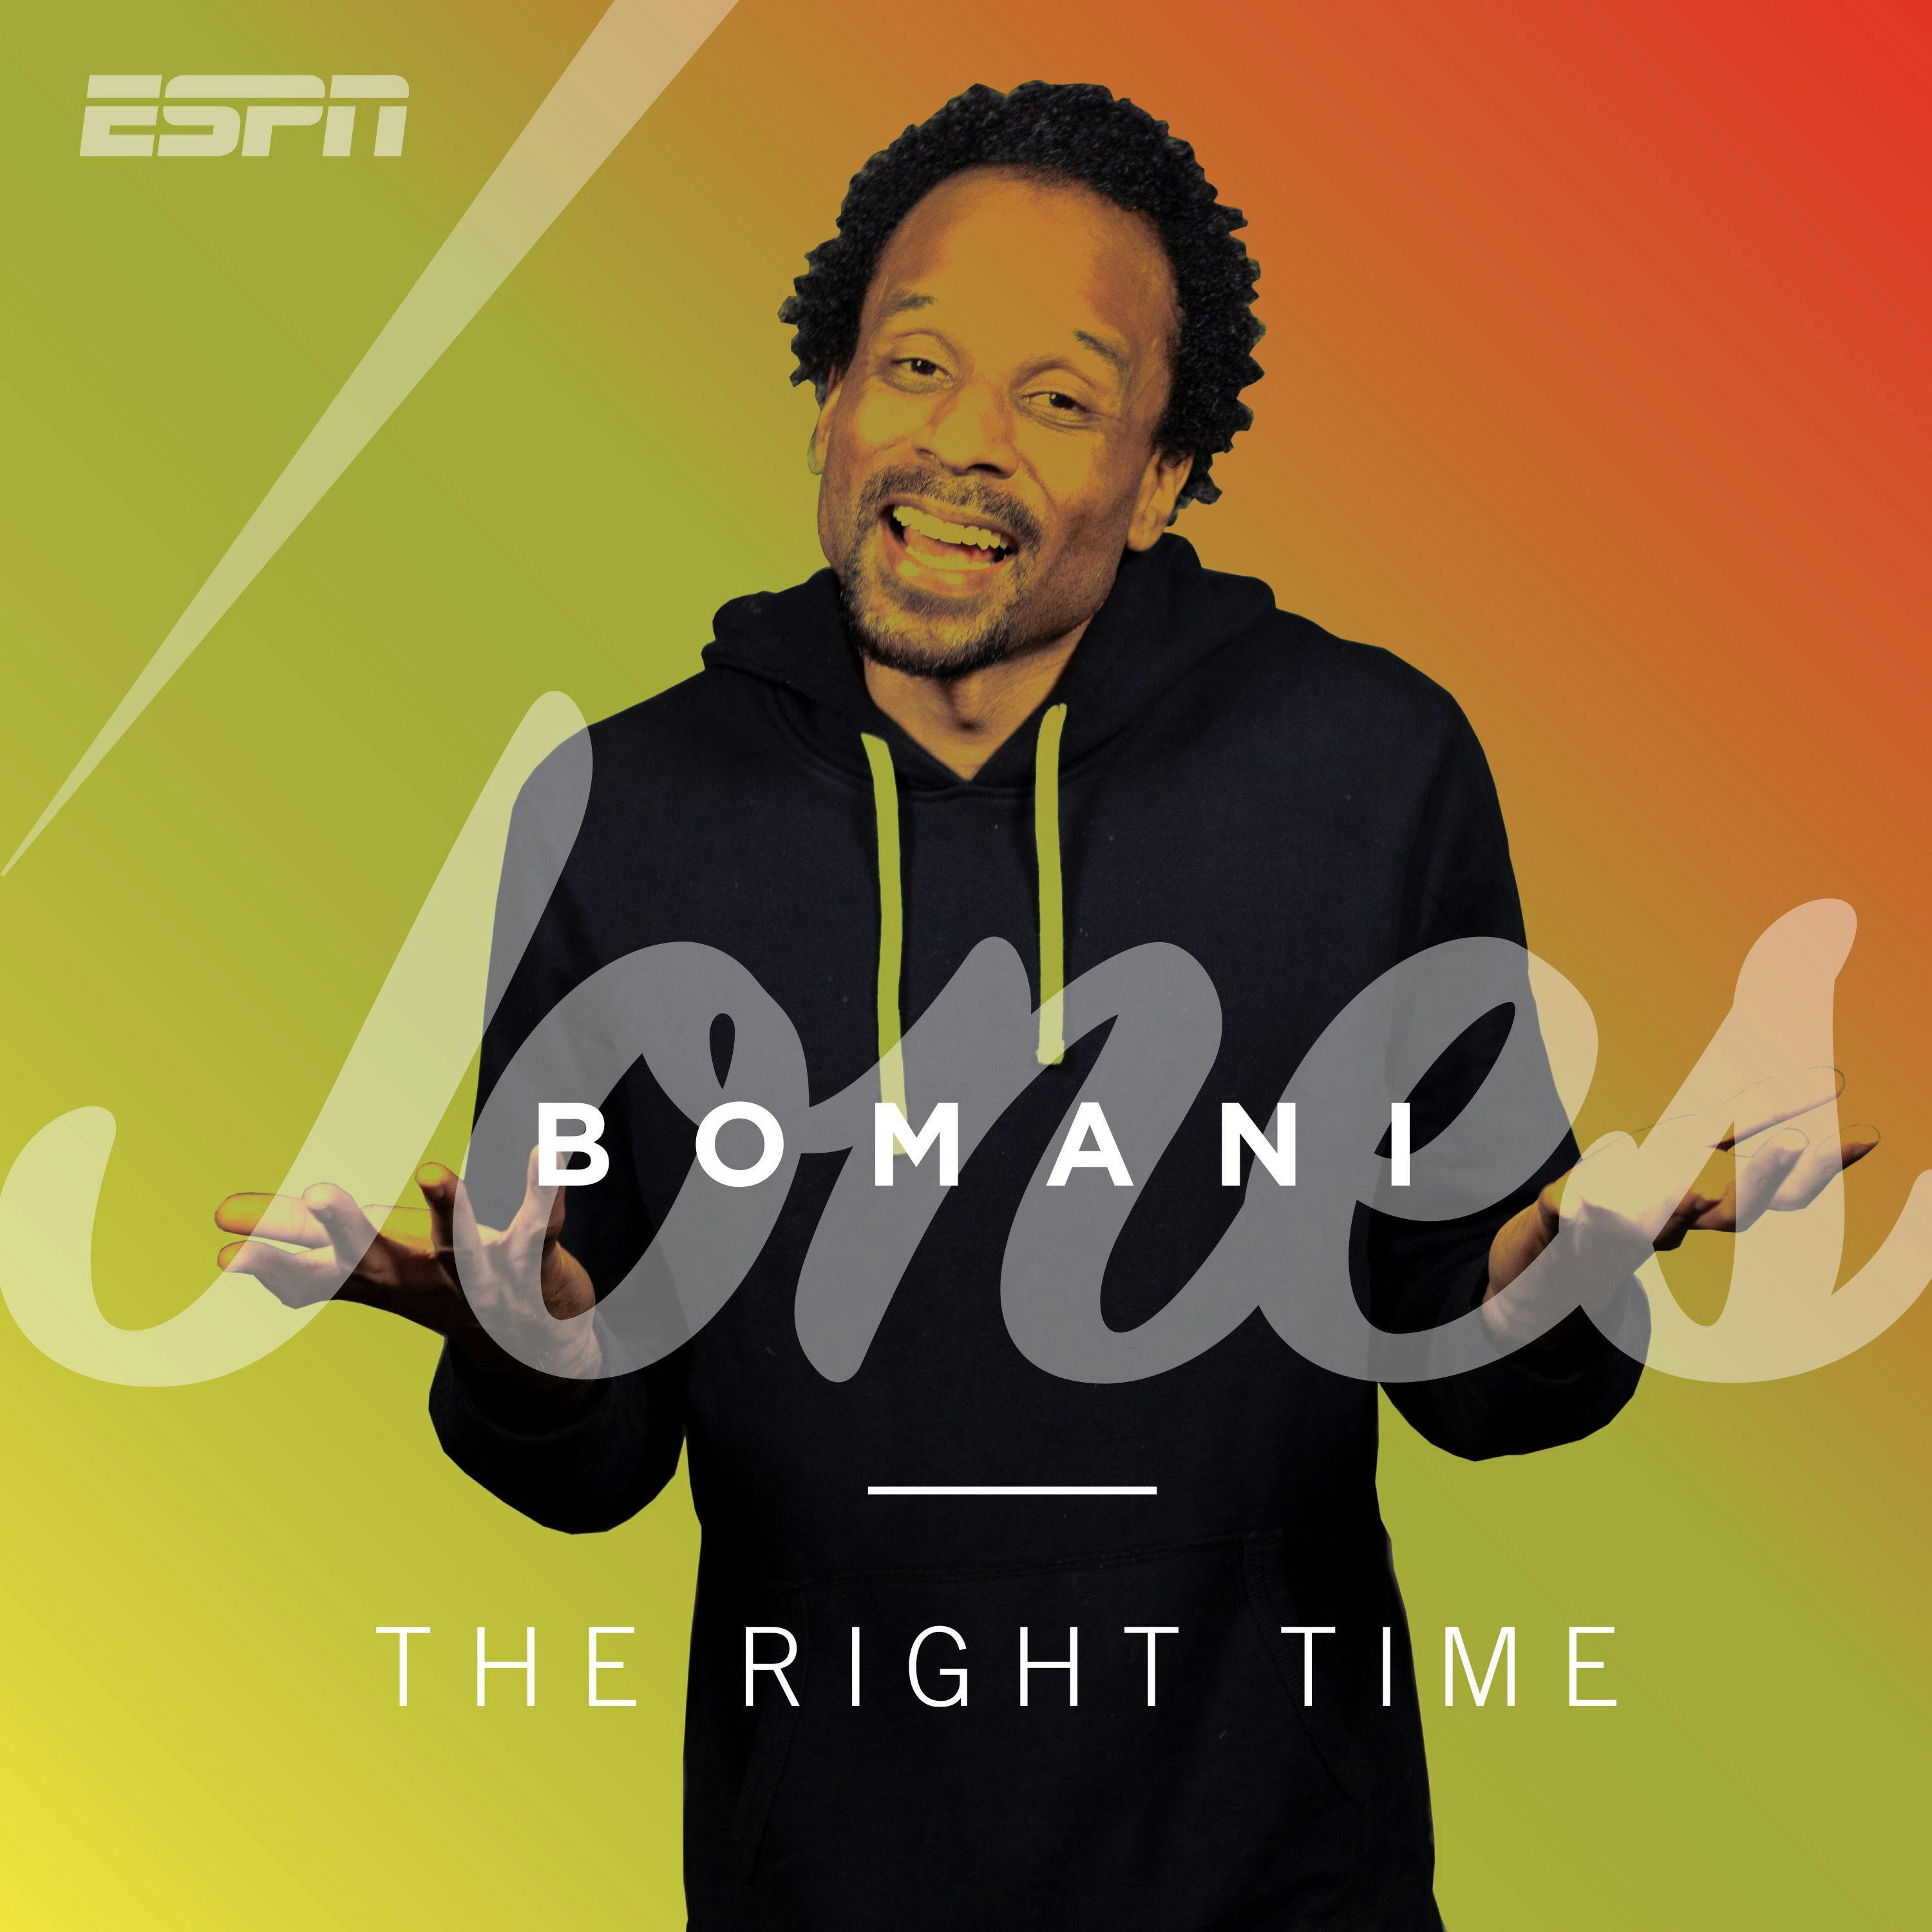 Xx Sex Video Mp3 - The Right Time with Bomani Jones Show - PodCenter - ESPN Radio